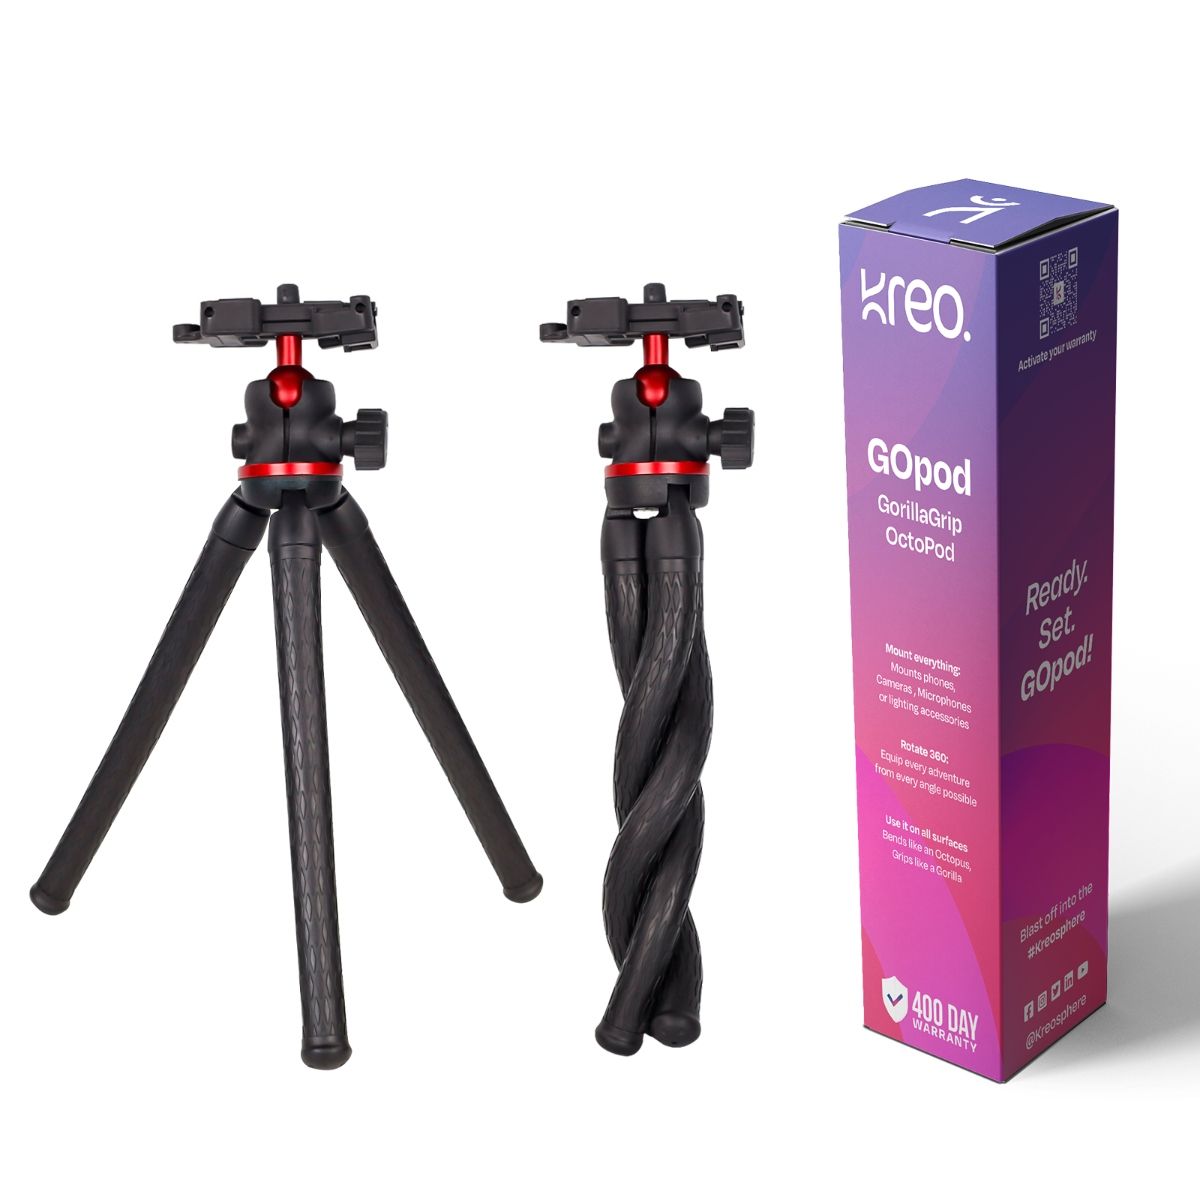 Kreo Go Pod, Gorilla Stand with Flexible Arms for Cameras, DSLR, Mobile Phones Tripod Ball Head